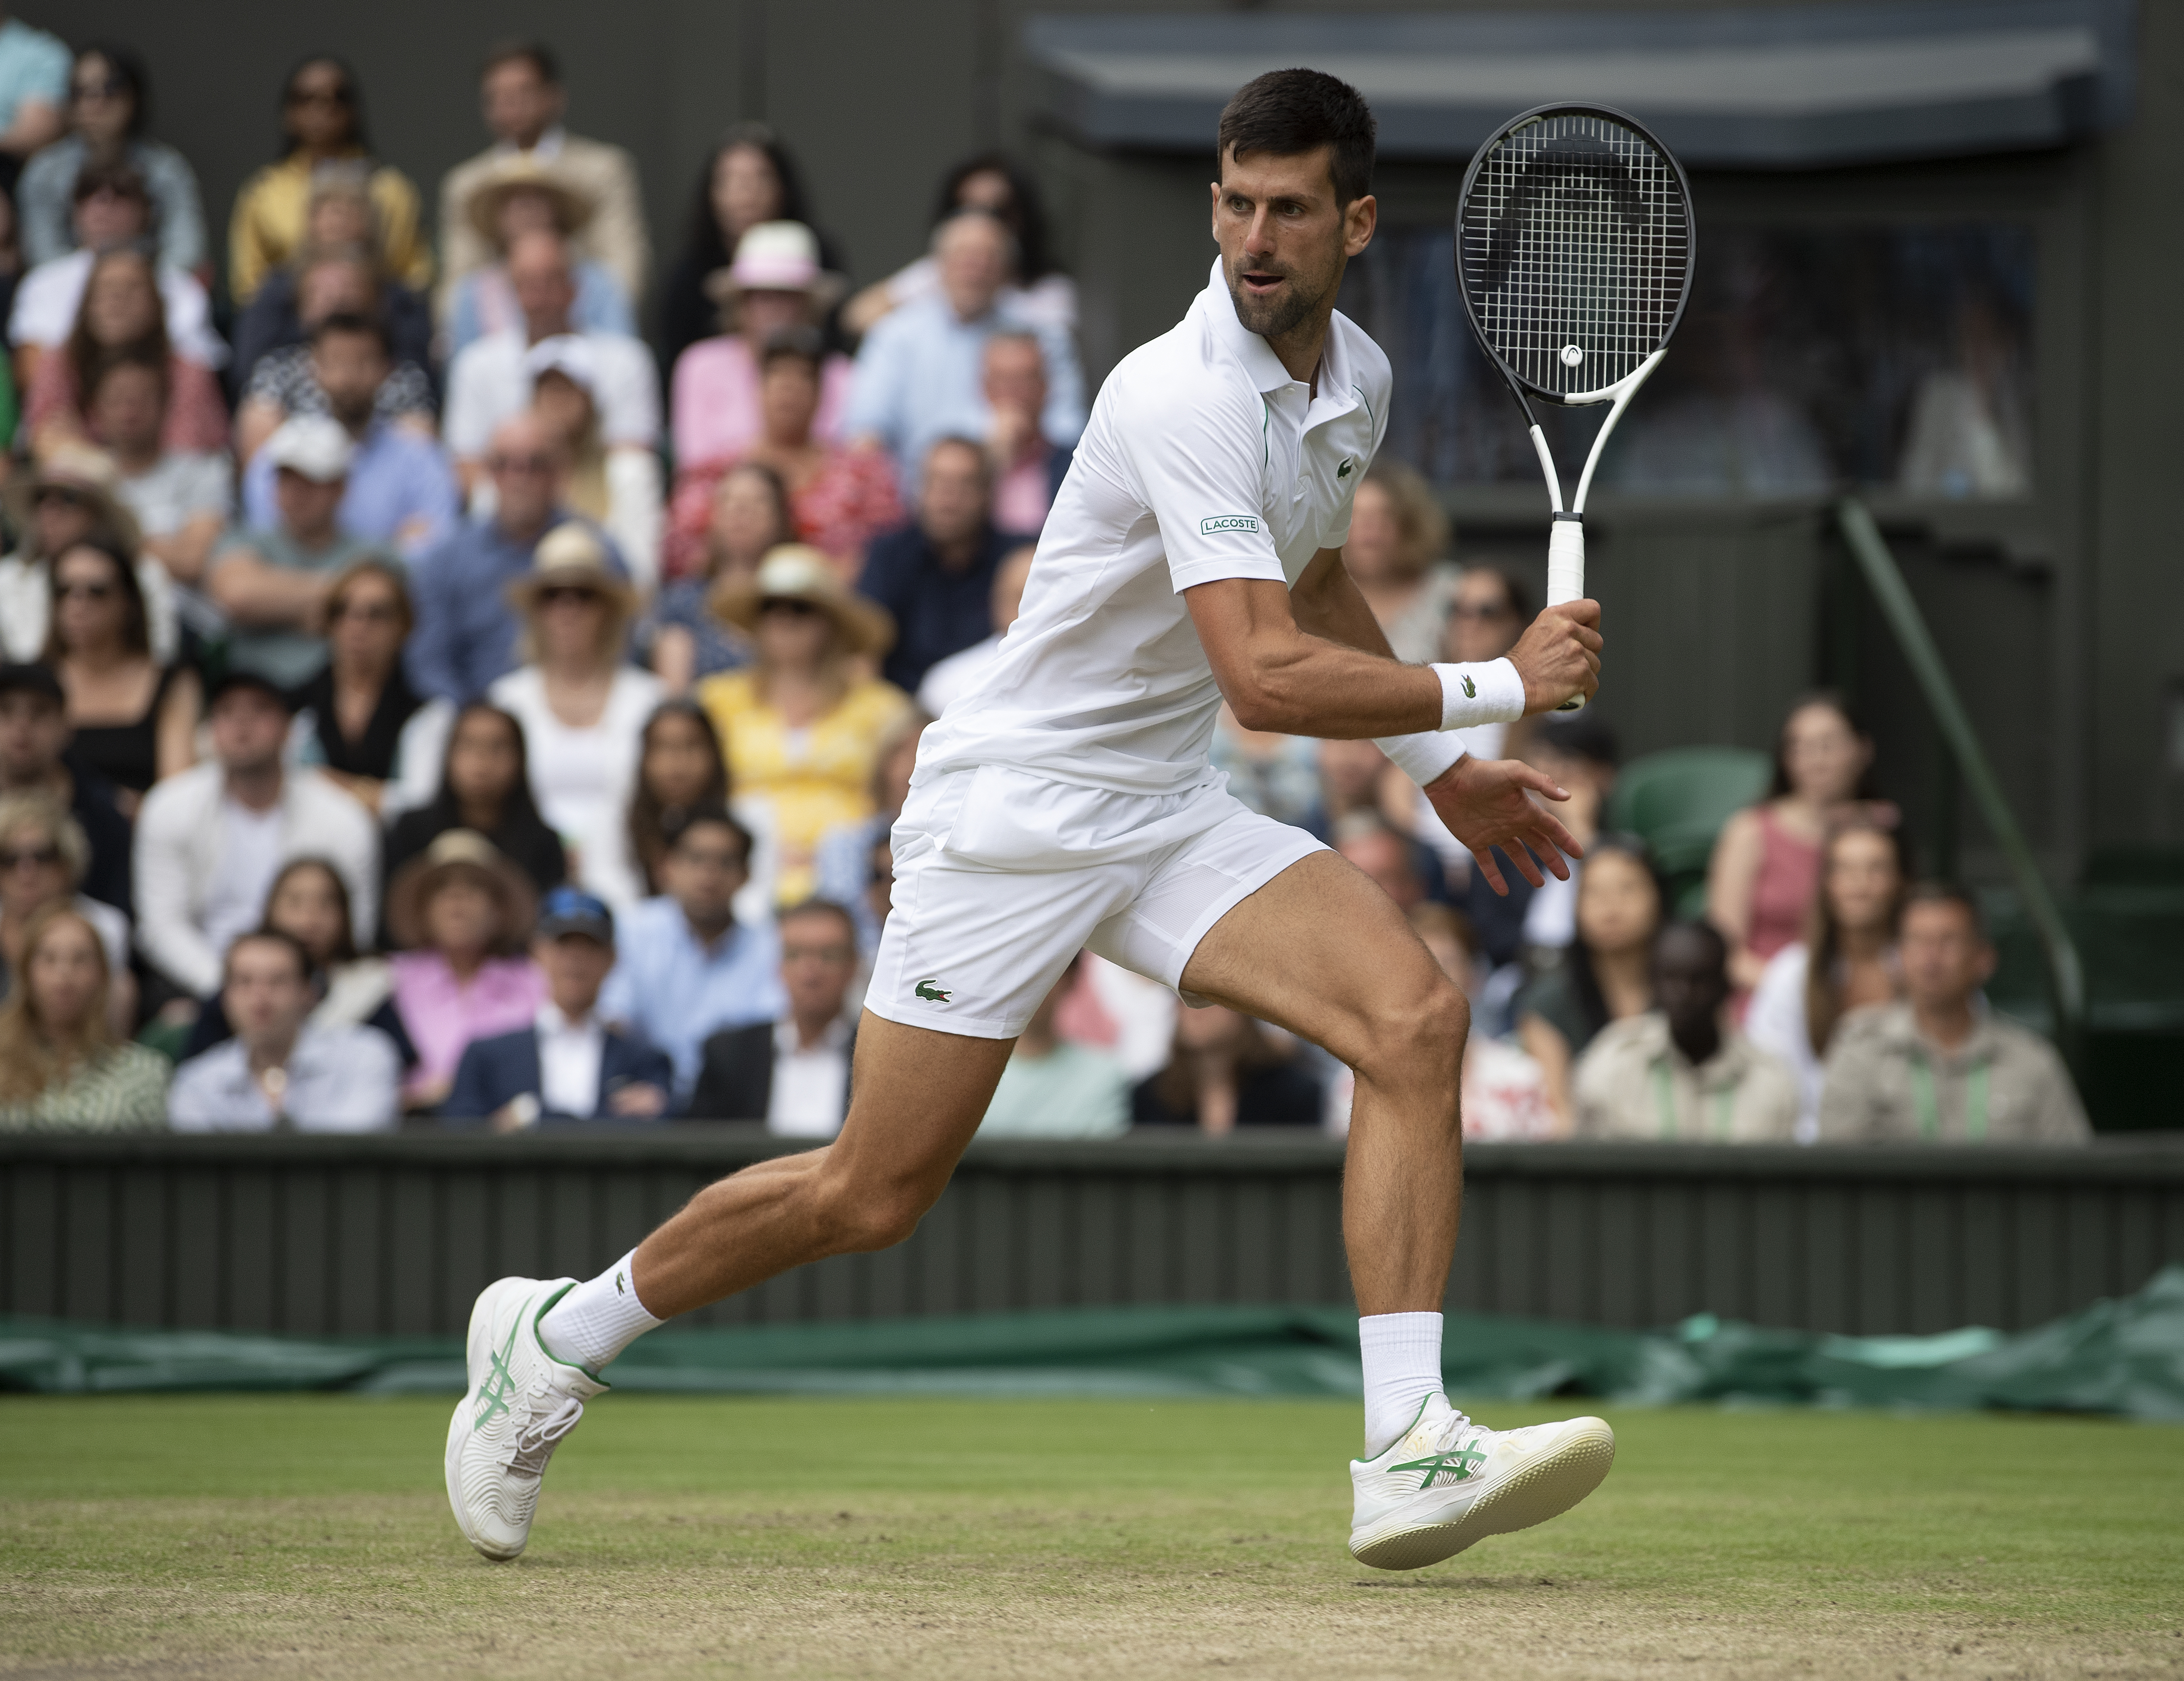 &nbsp;Novak Djokovic of Serbia during hia match against Jannik Sinner of Italy during their Men’s Singles Quarter Final match on day nine of The Championships Wimbledon 2022 at All England Lawn Tennis and Croquet Club on July 05, 2022 in London, England.